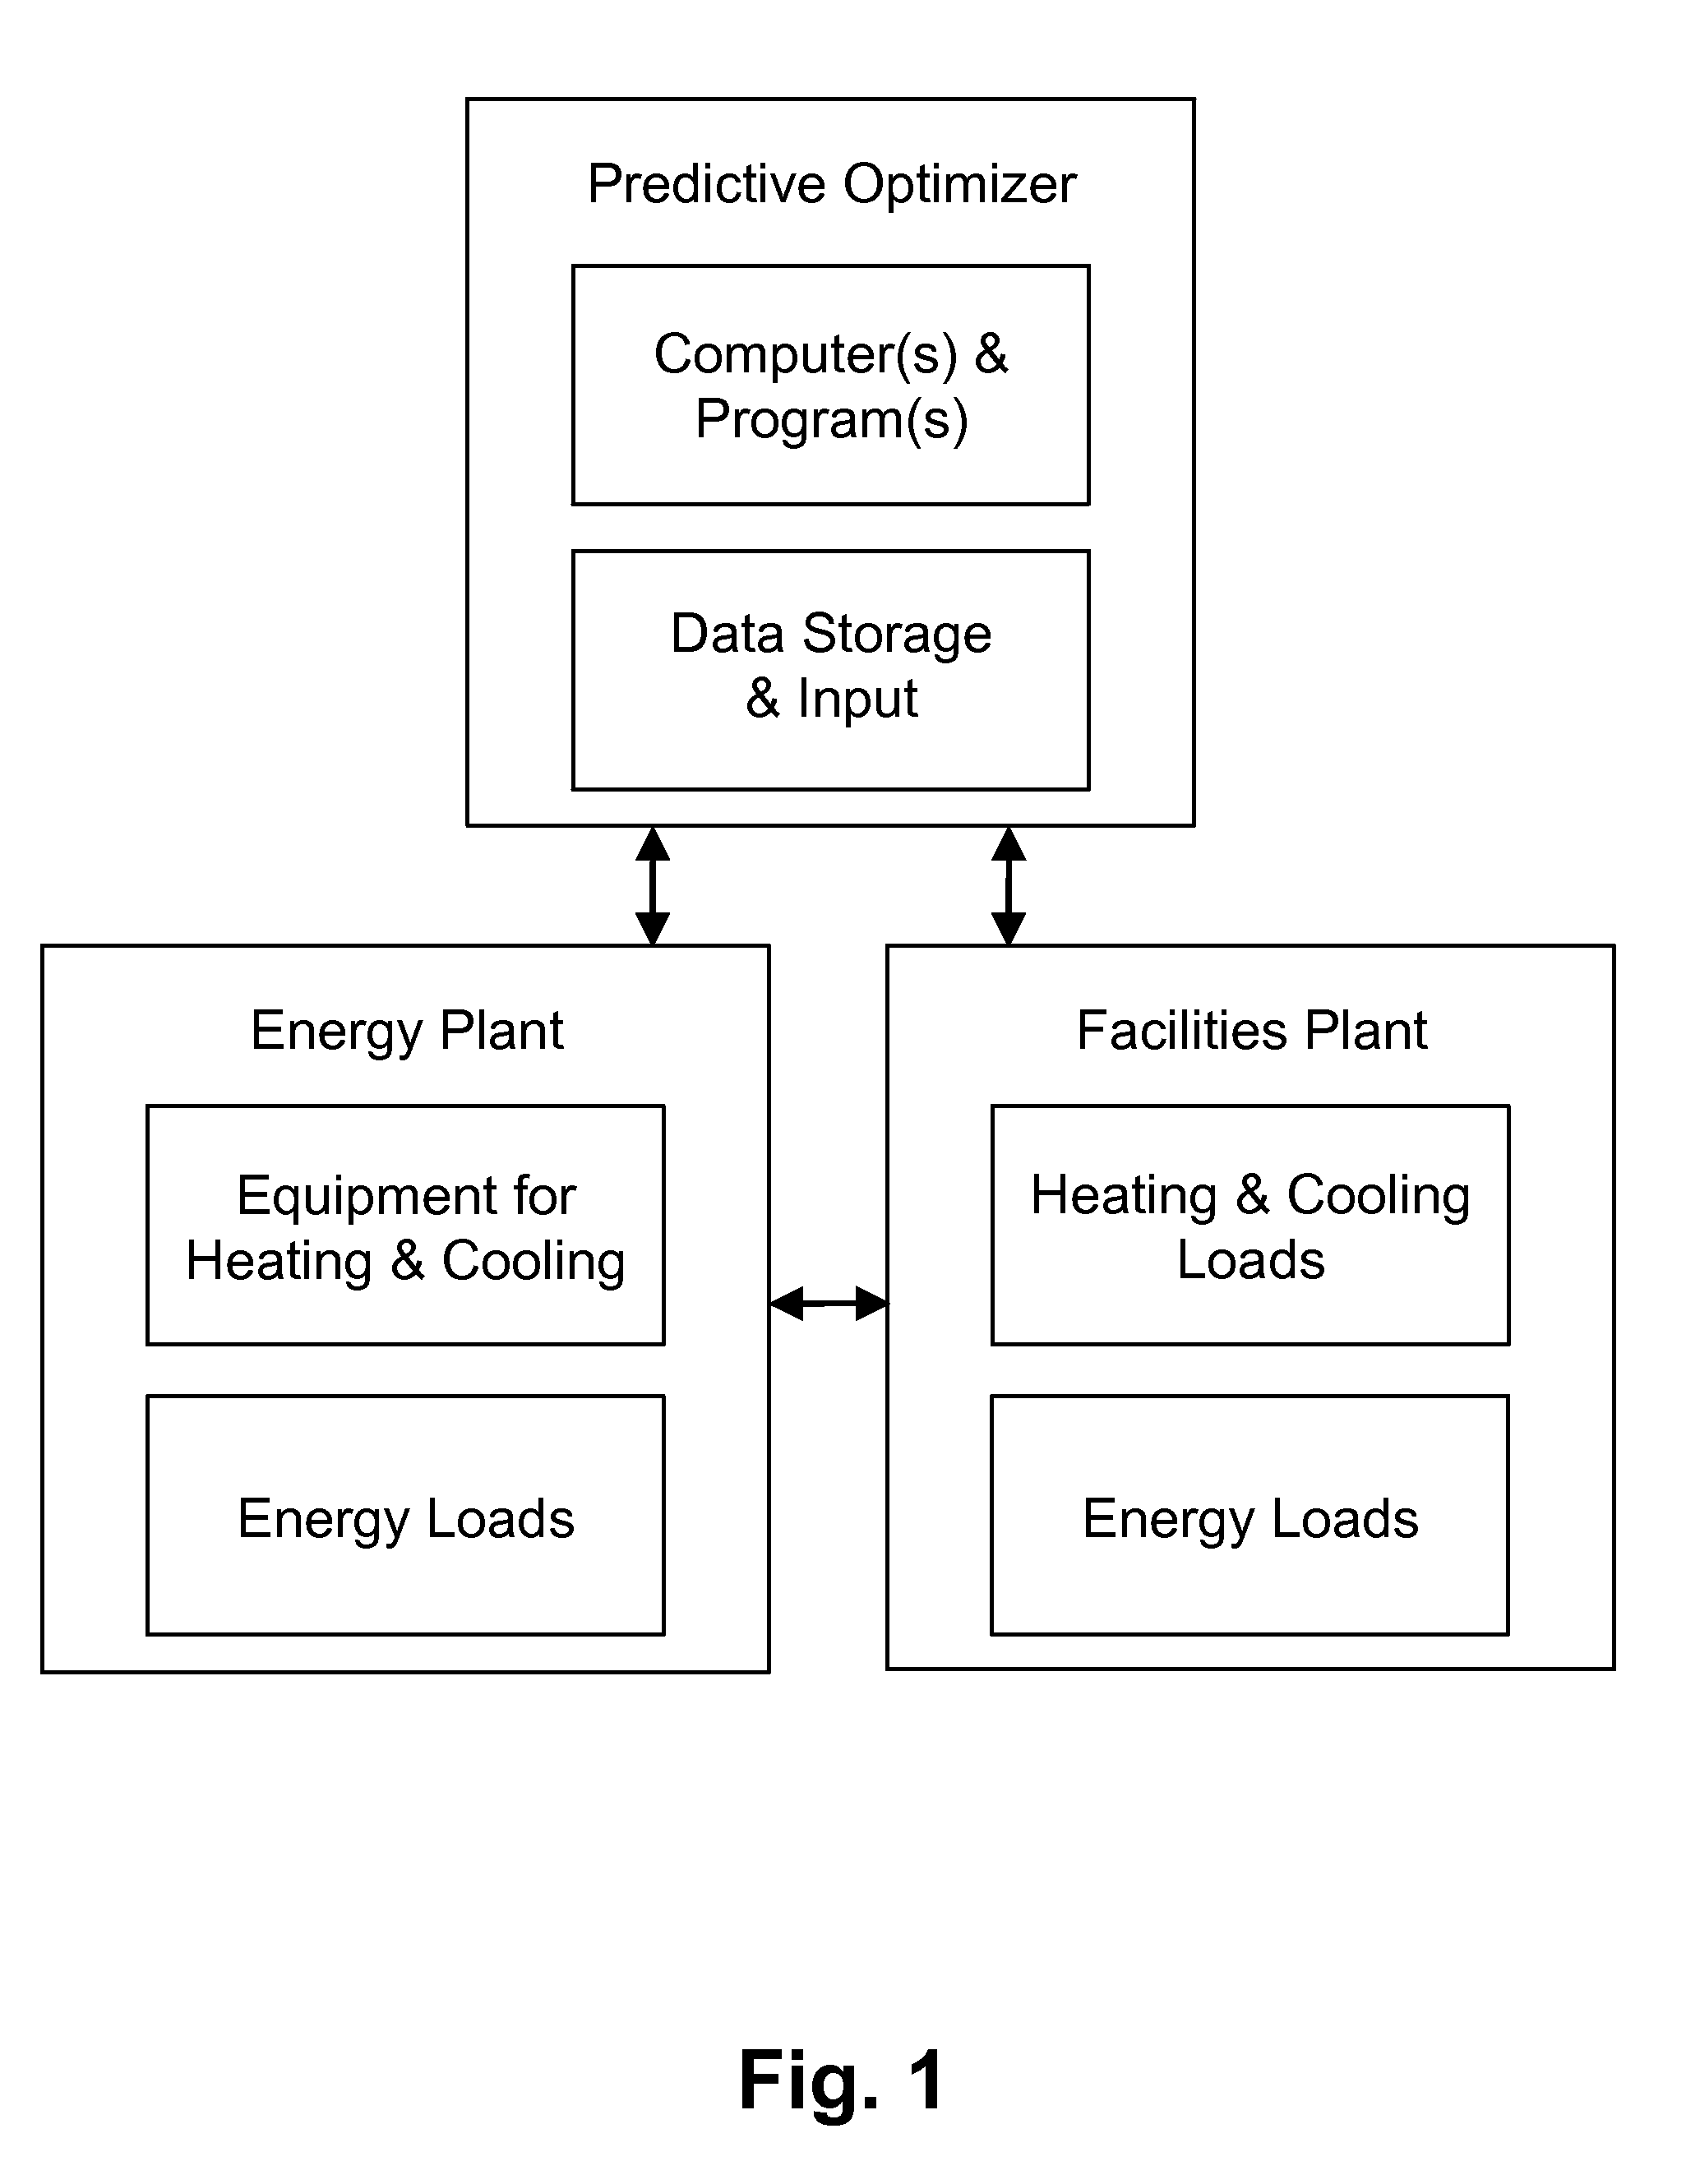 Energy plant design and operation